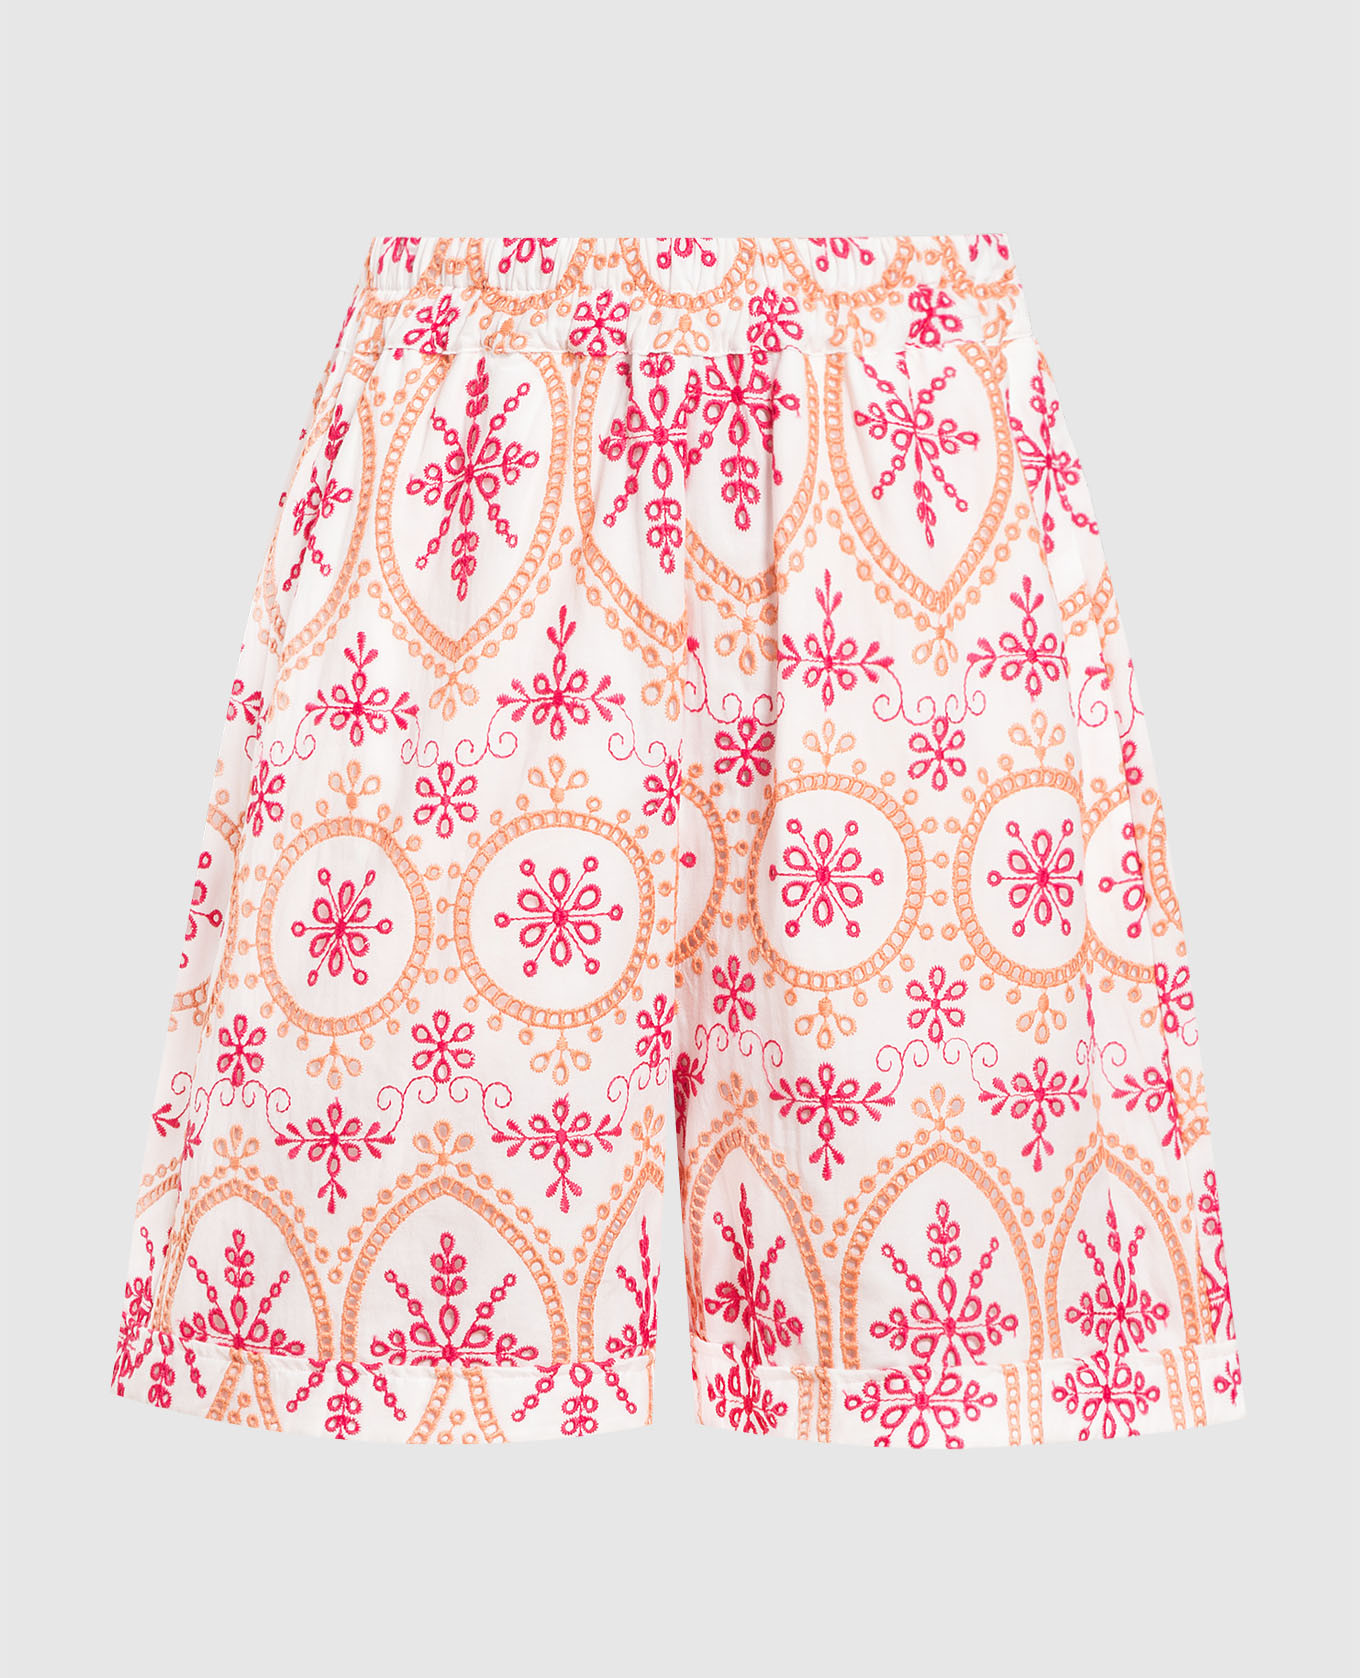 Lyo white shorts with broderie embroidery